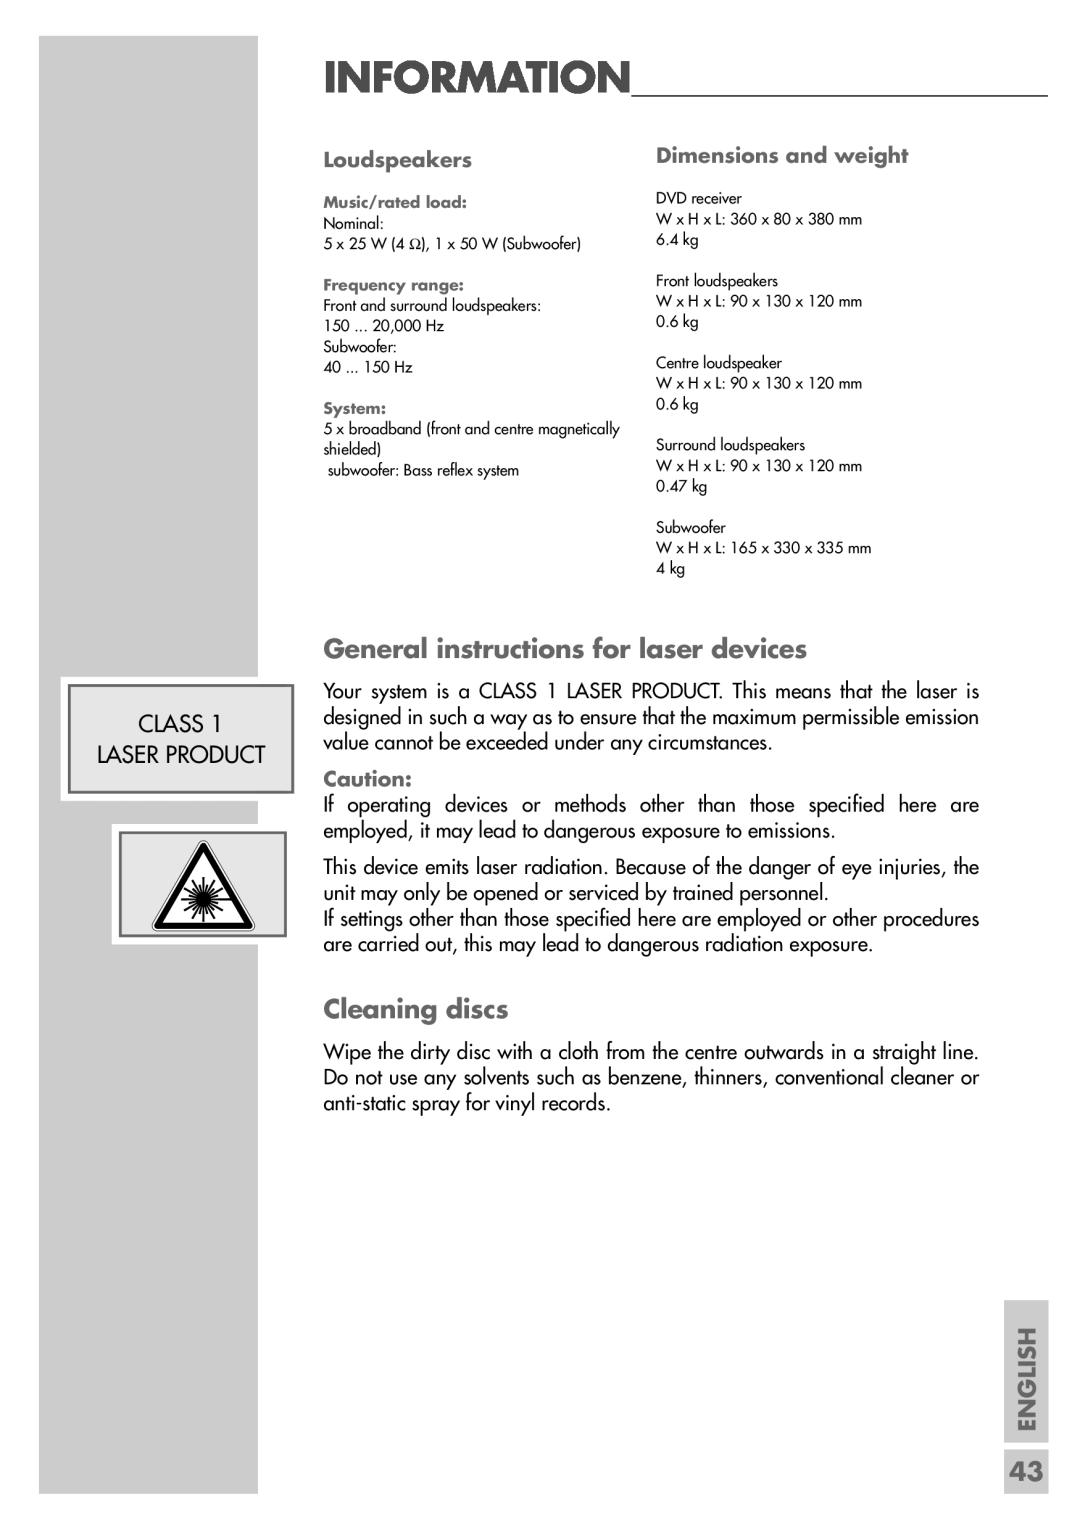 Grundig DR 3400 DD manual General instructions for laser devices, Cleaning discs, Information, Class Laser Product, English 